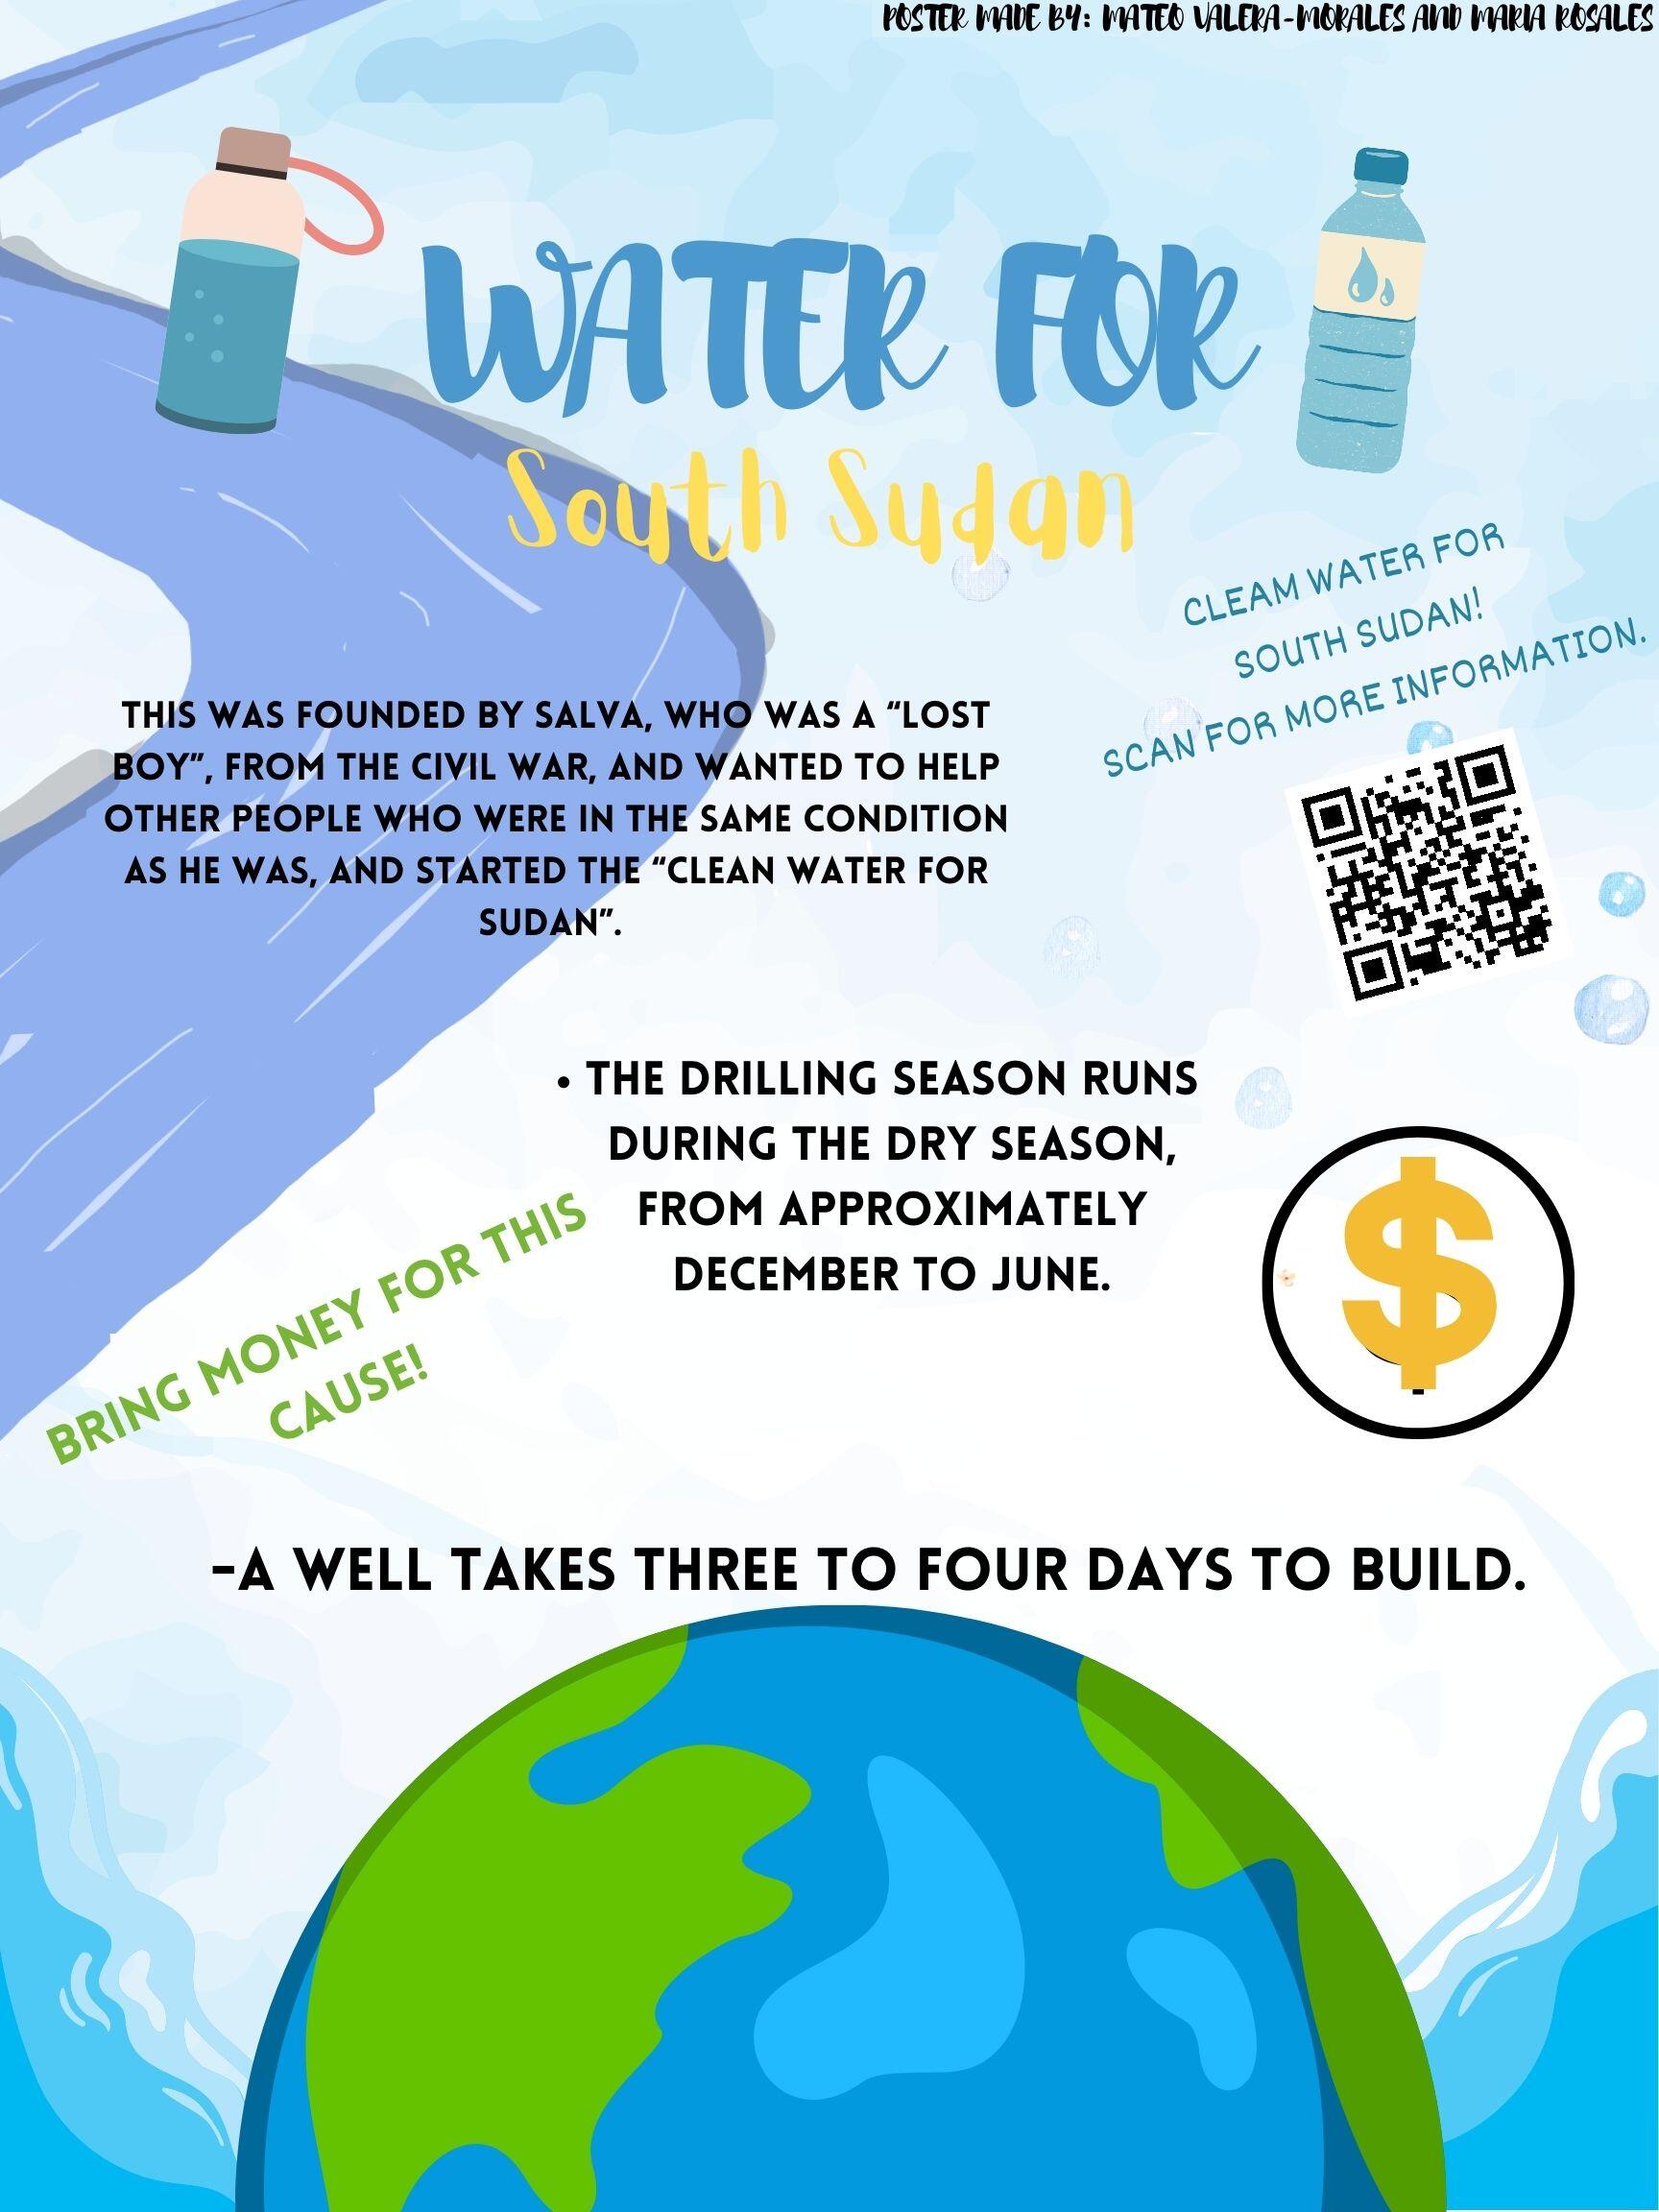 Winning poster in the "Water for South Sudan" poster contest